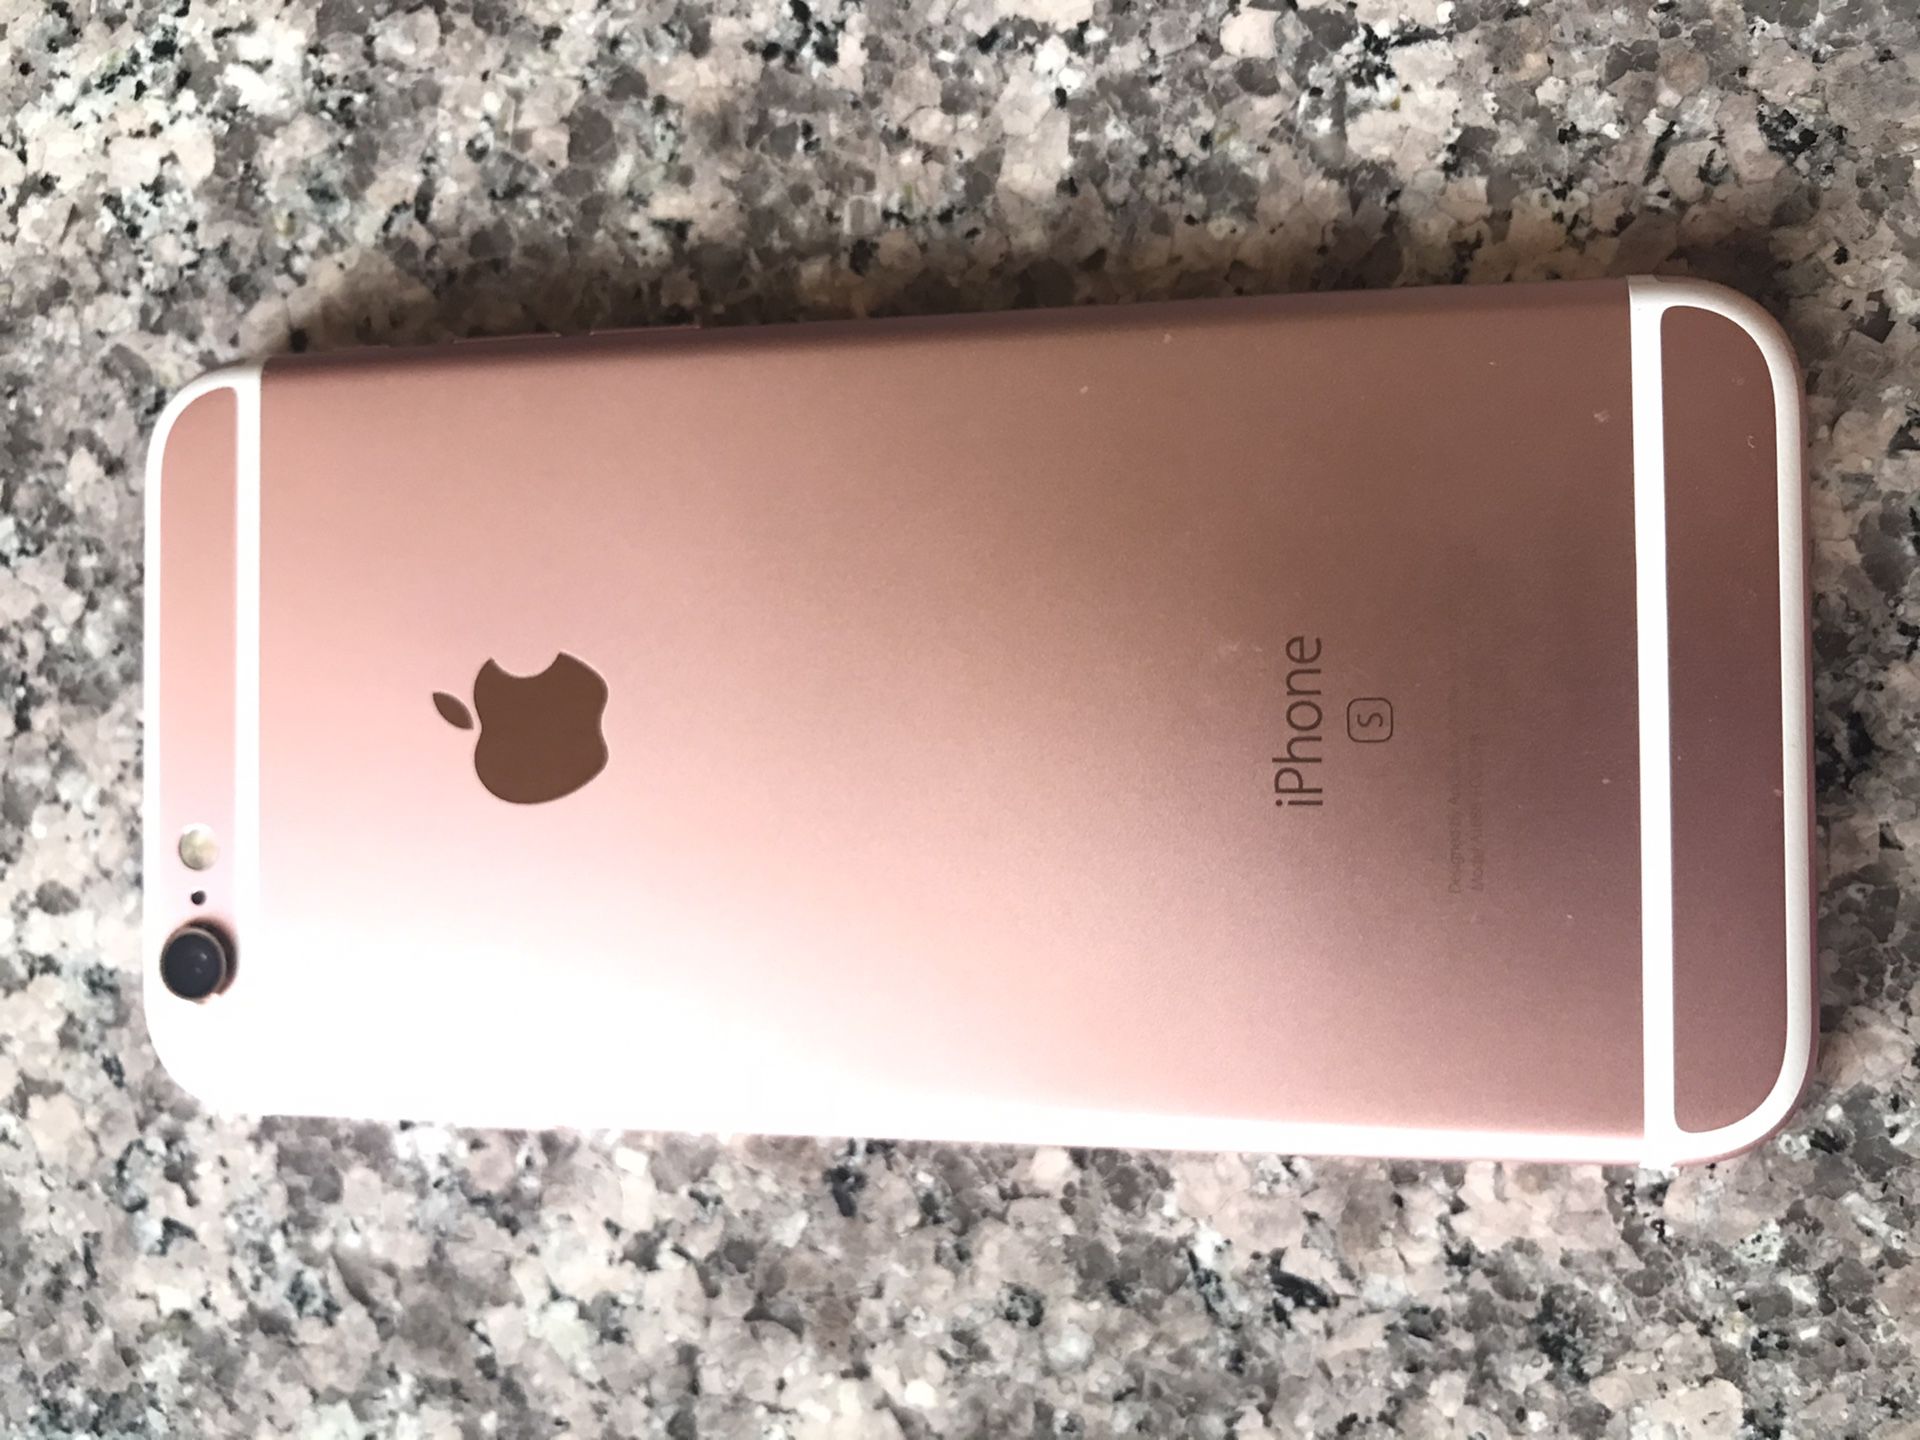 Iphone 6s boost mobile Rose gold perfect condition $120